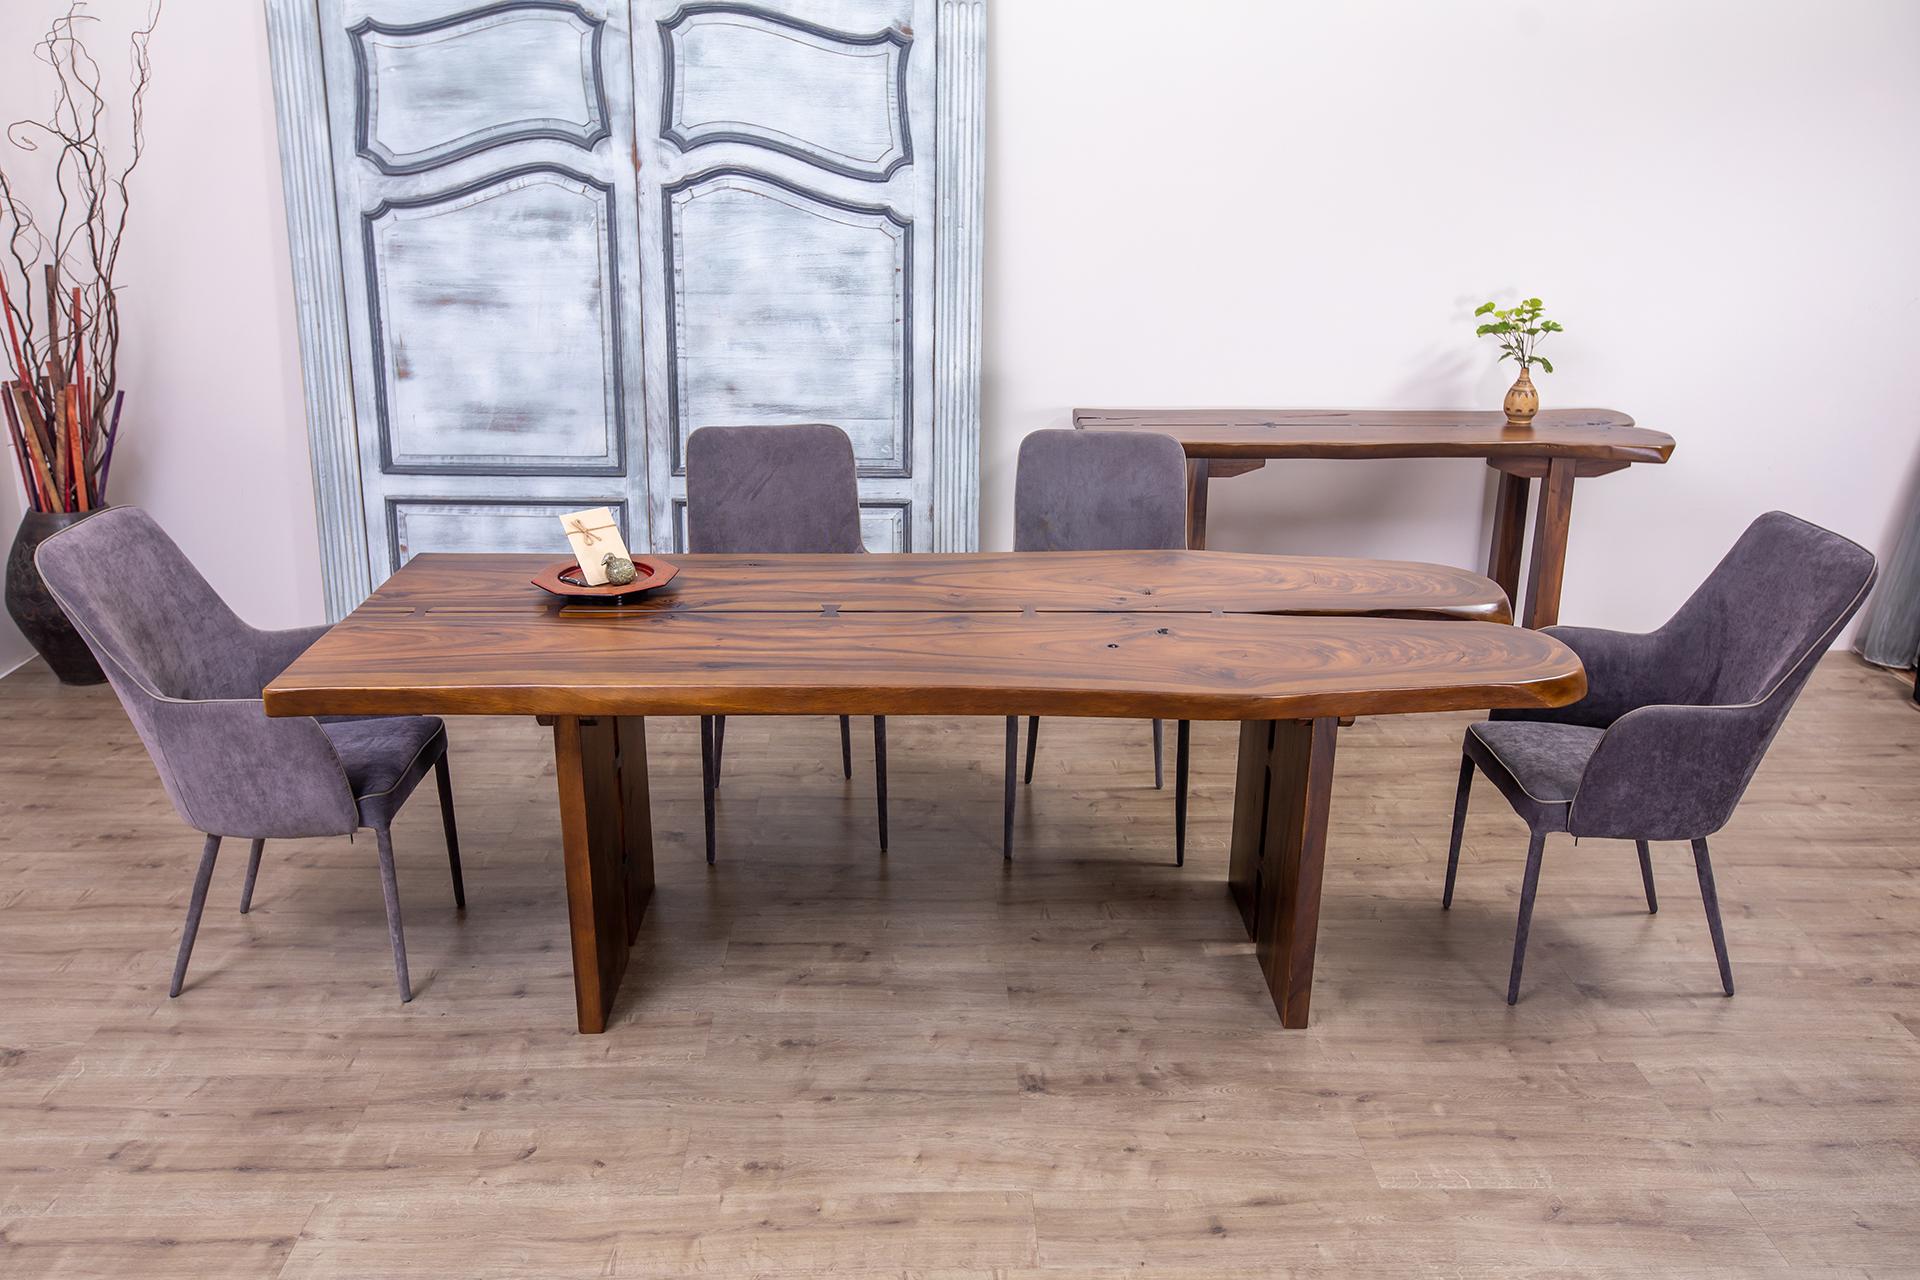 he Table Company makes only 100% solid, hardwood furniture.  We primarily use Thai/Burmese Teak, North American Red and White Oak, and old-growth Cham-Cha (Siam Acacia).  Unlike many mass-market manufacturers and retailers, our furniture is made